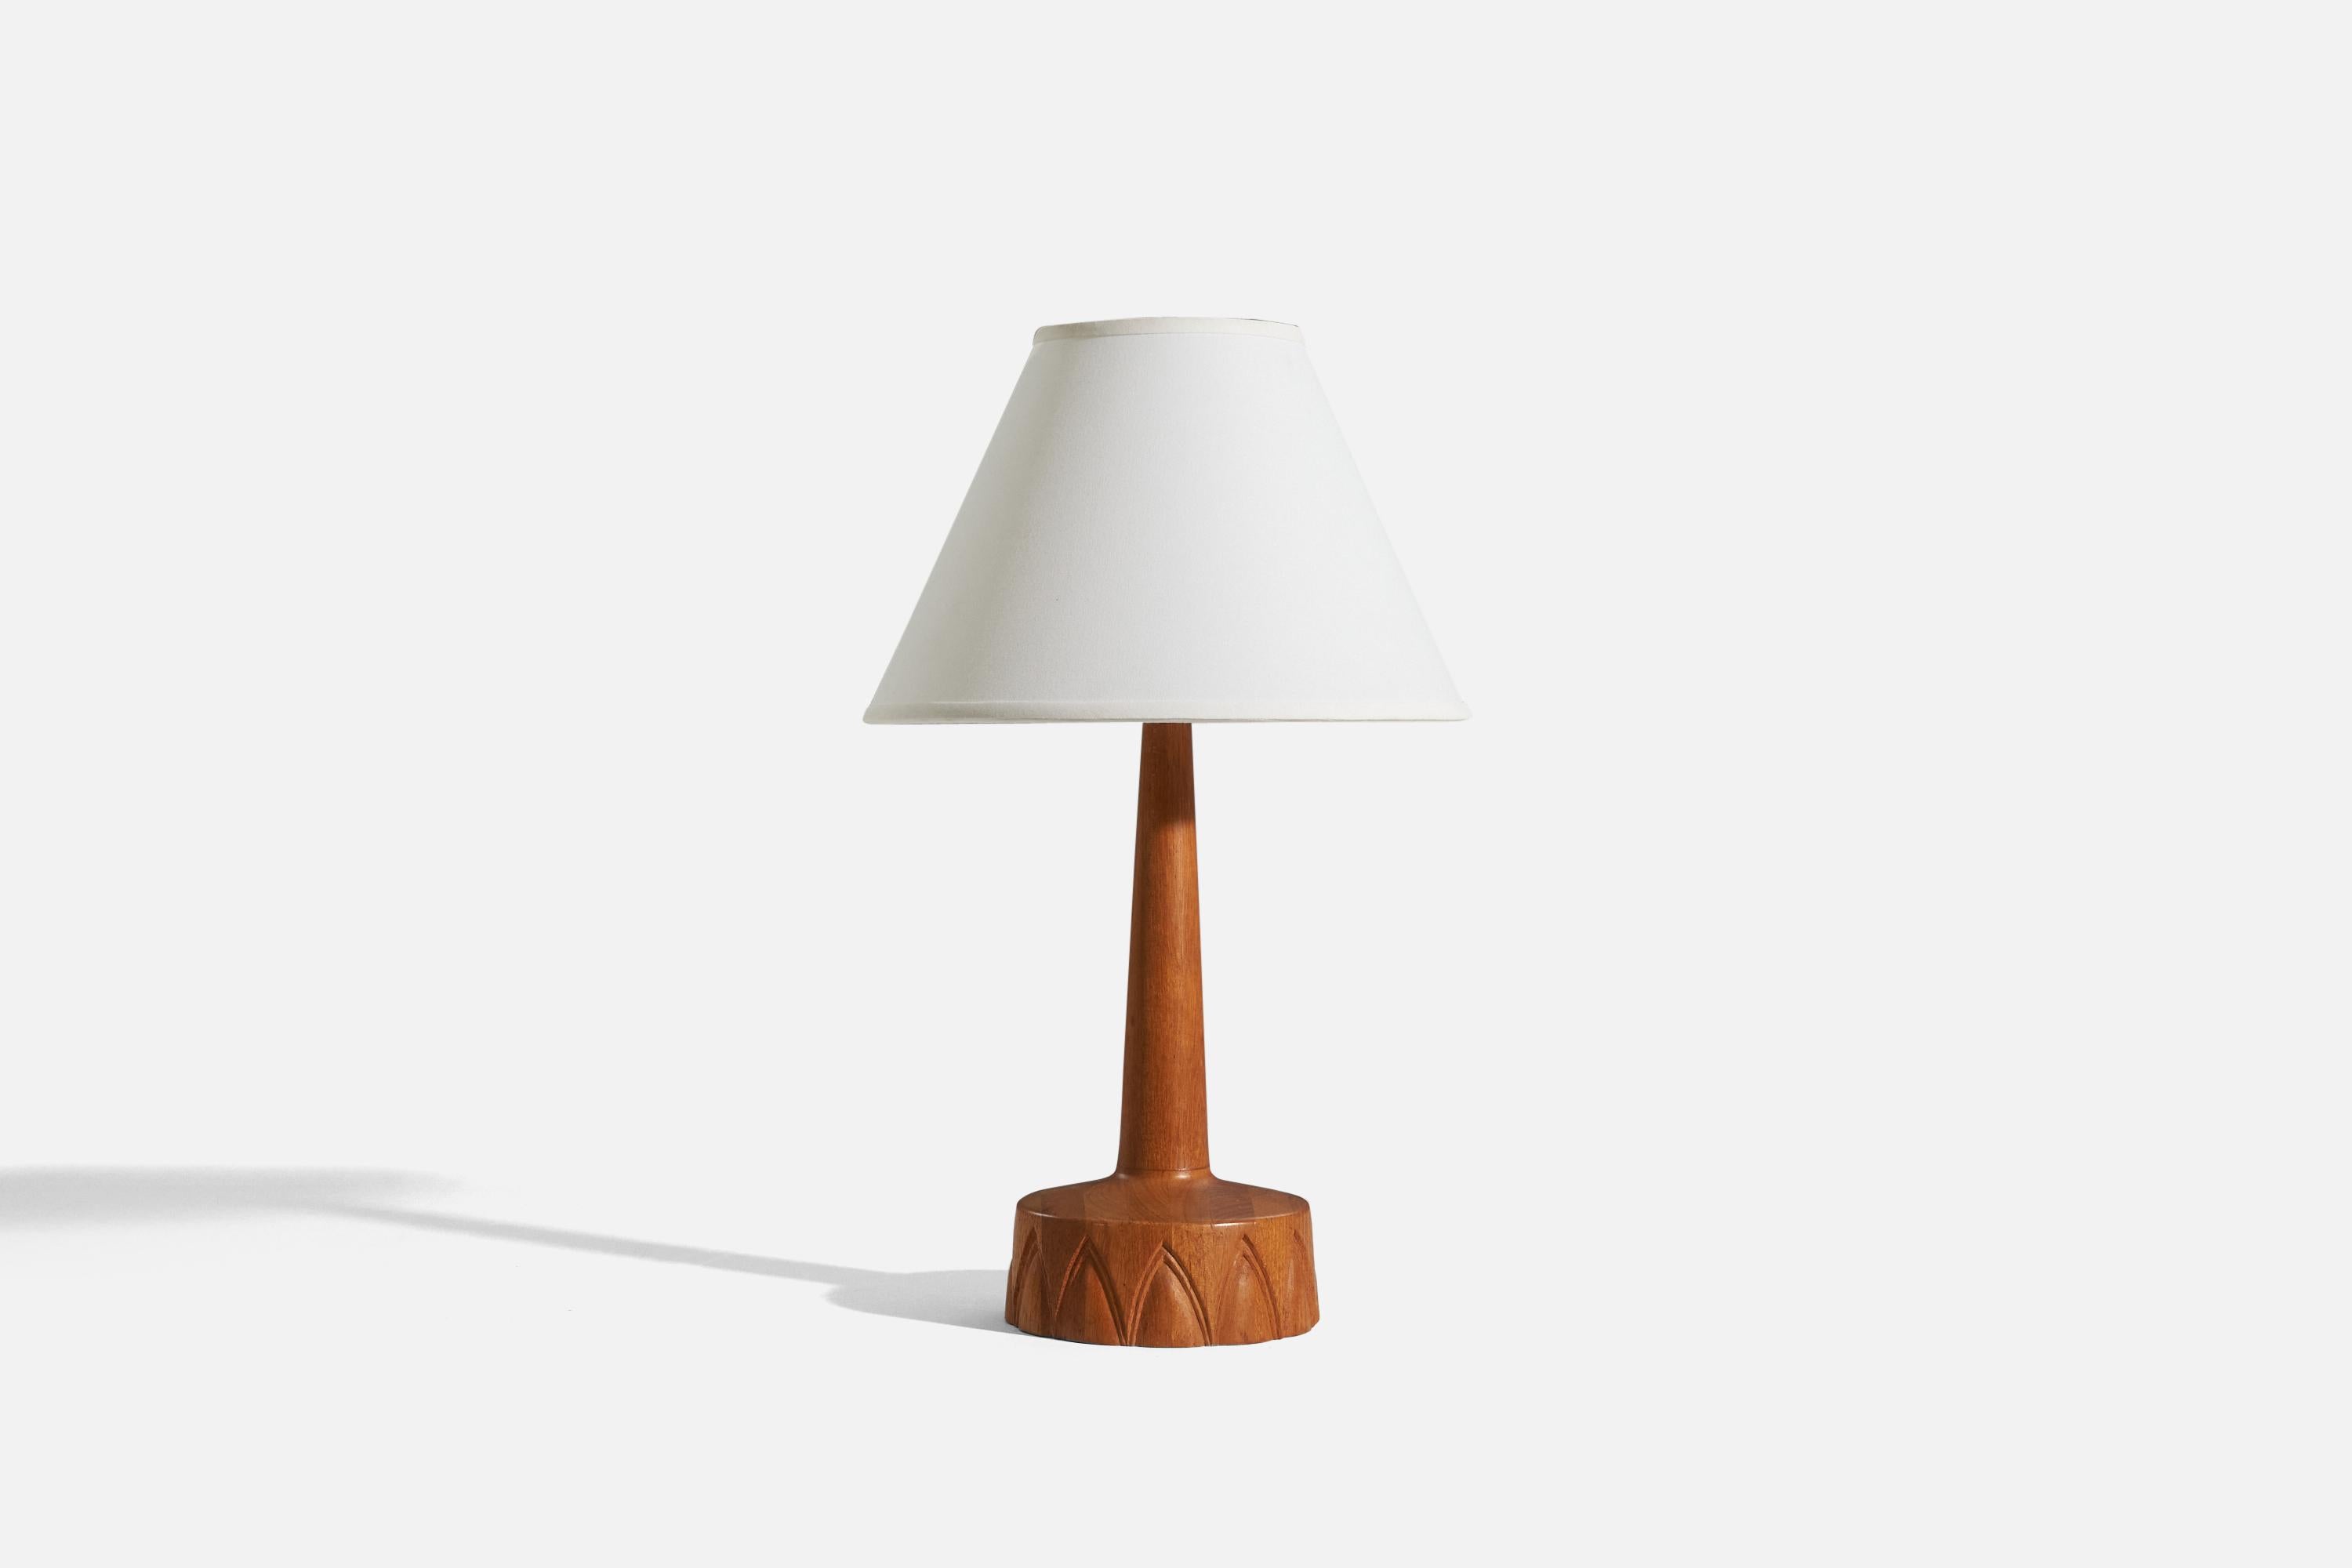 A teak and brass table lamp designed and produced in Sweden, 1960s. 

Sold without lampshade. 
Dimensions of lamp (inches) : 16.8125 x 6.3125 x 6.3125 (H x W x D)
Dimensions of shade (inches) : 5 x 12.25 x 8.75 (T x B x H)
Dimension of lamp